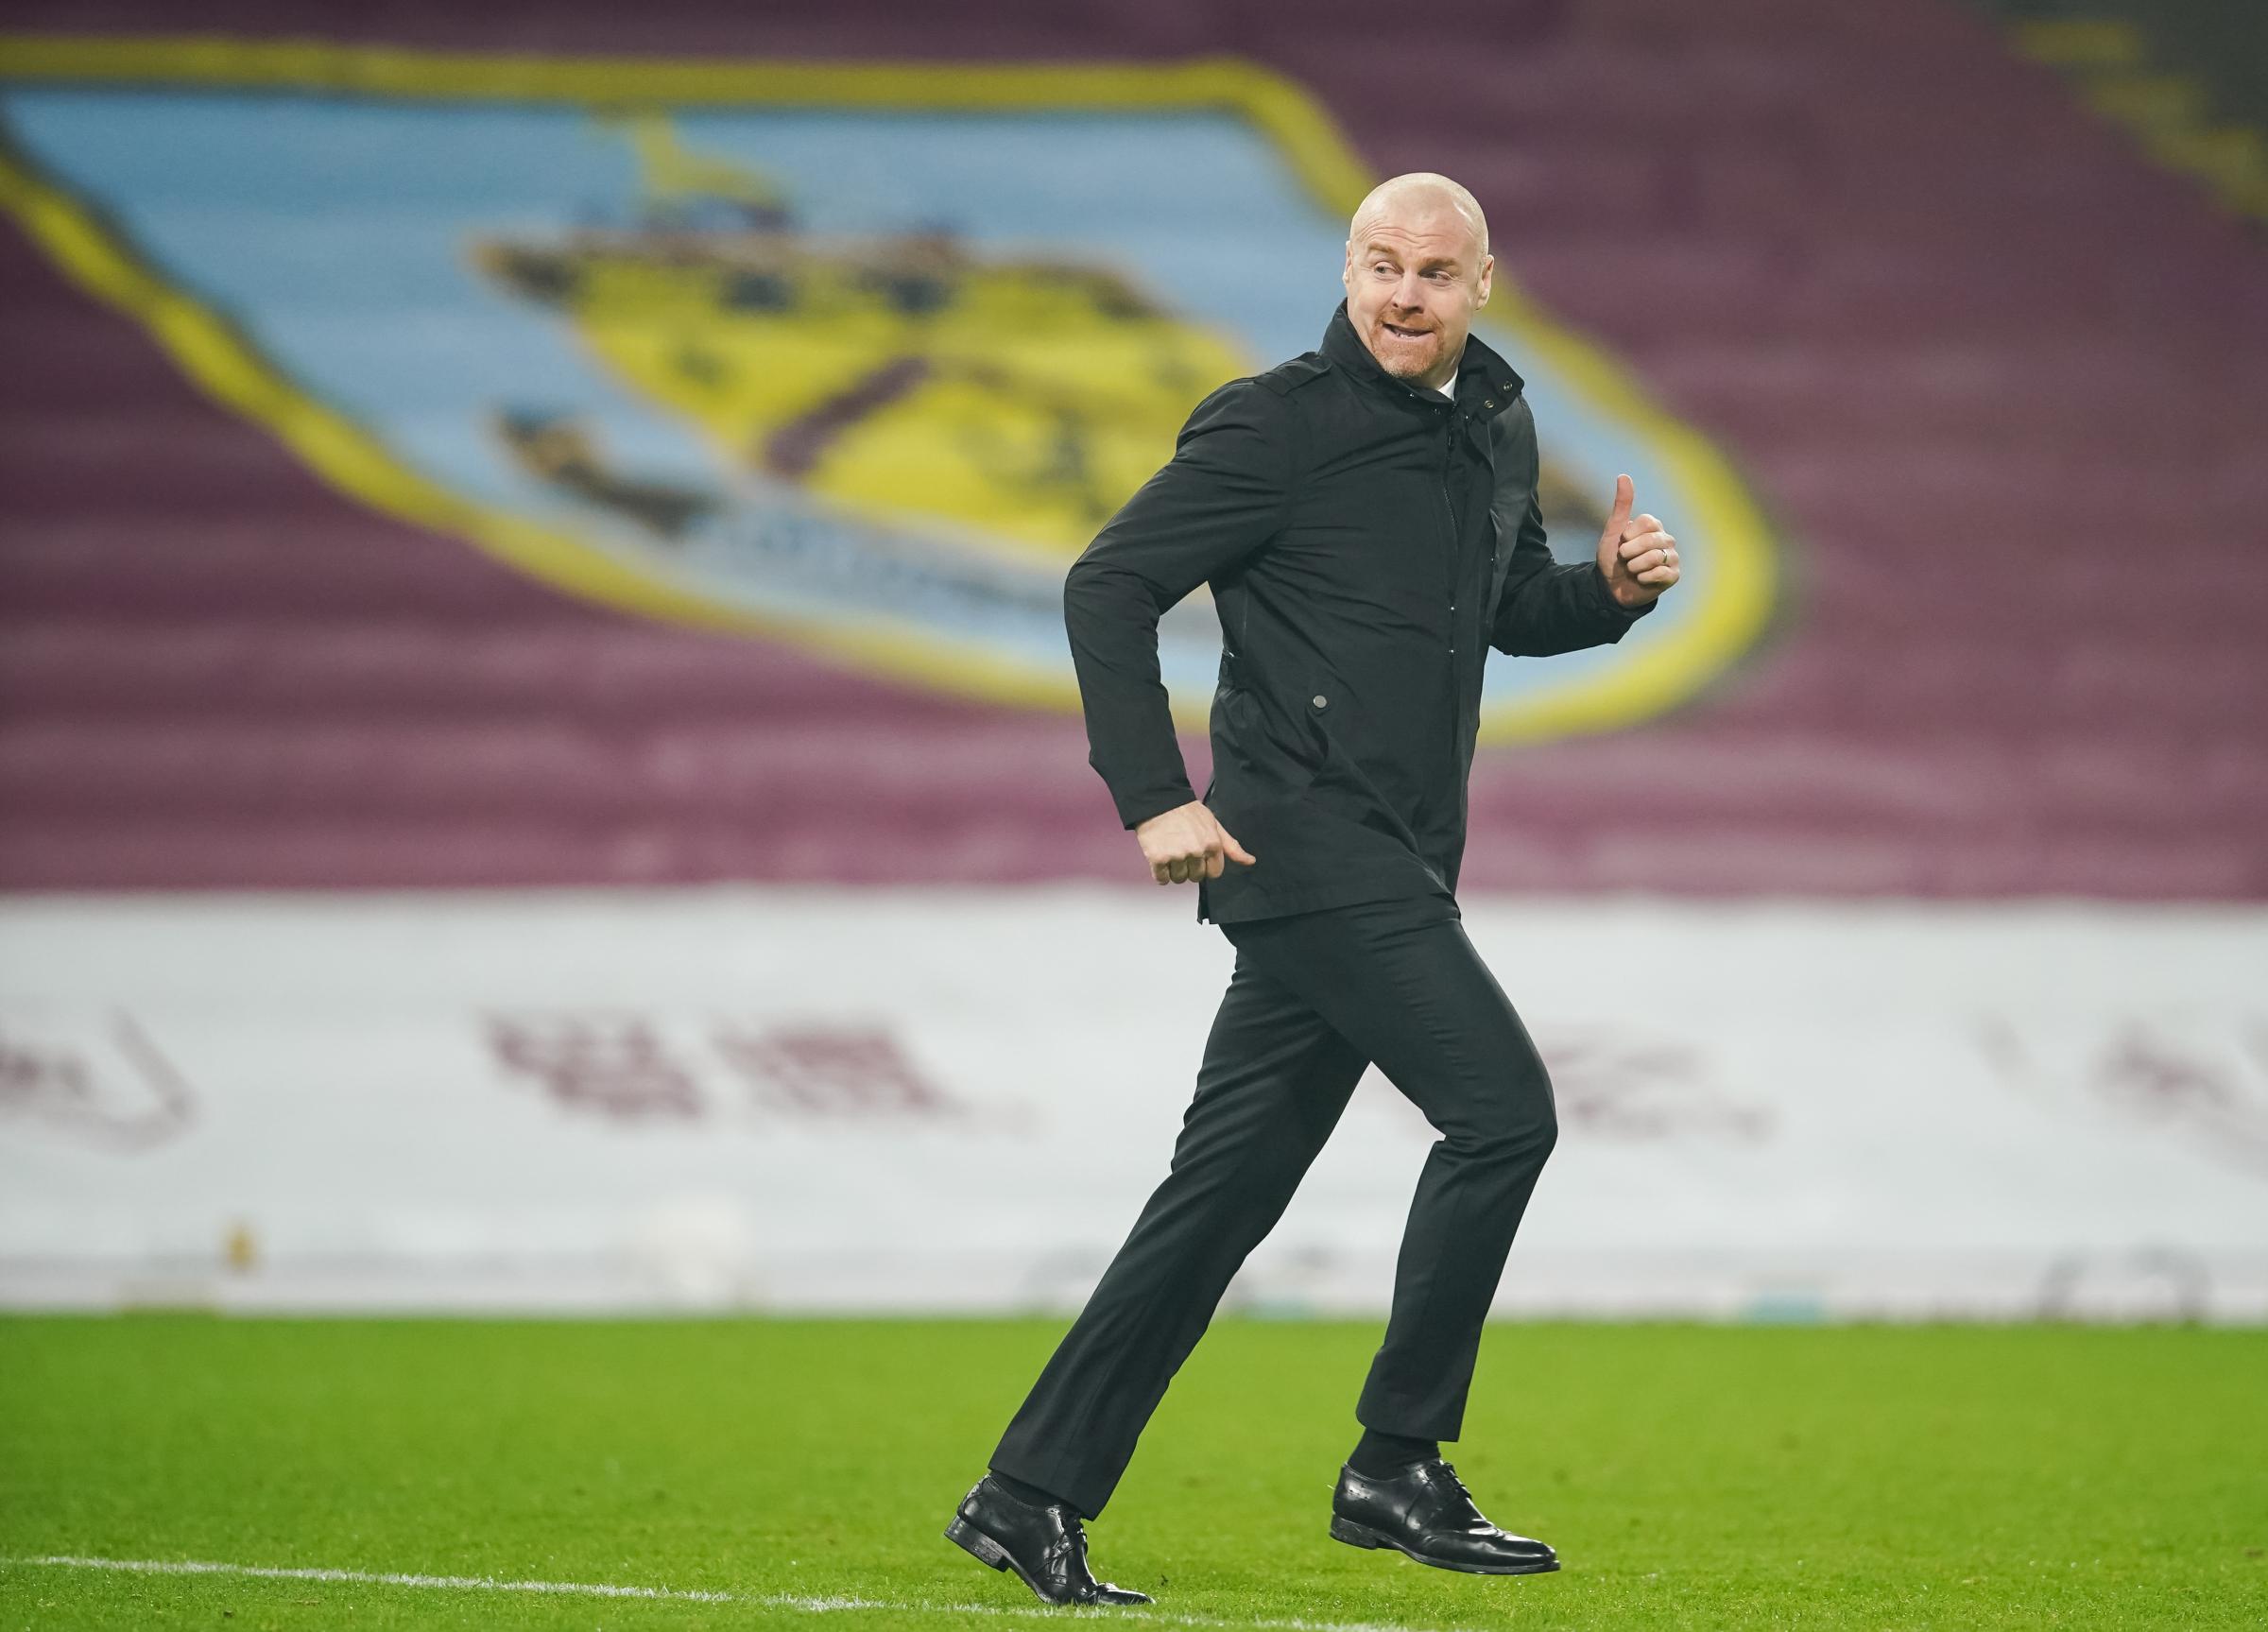 Burnley boss Sean Dyche on importance of seeing funny side